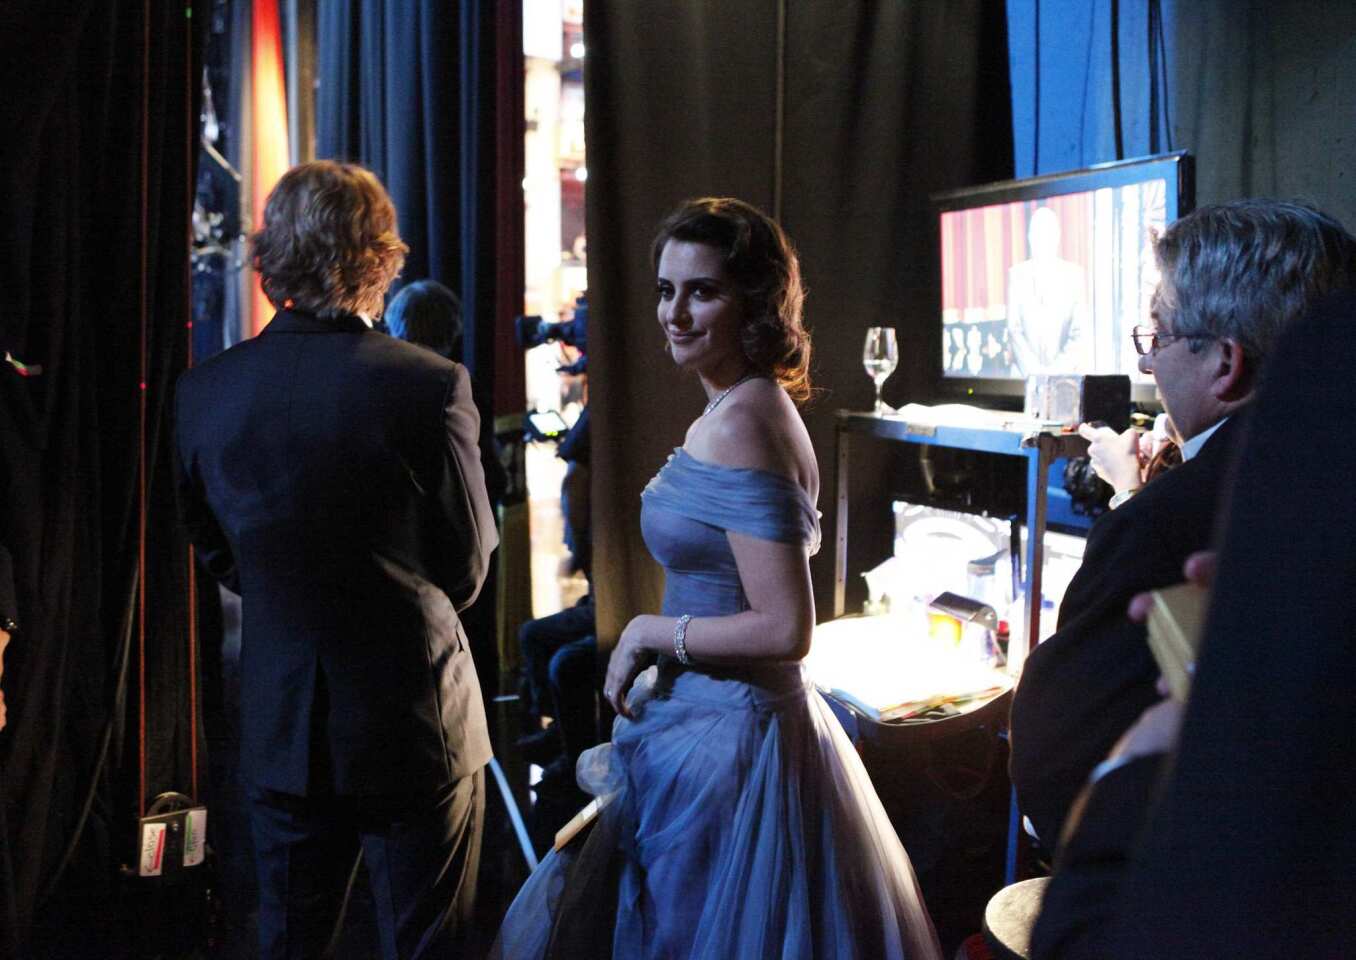 Penélope Cruz waits in the wings before presenting an Oscar at the 2012 Academy Awards in Hollywood.